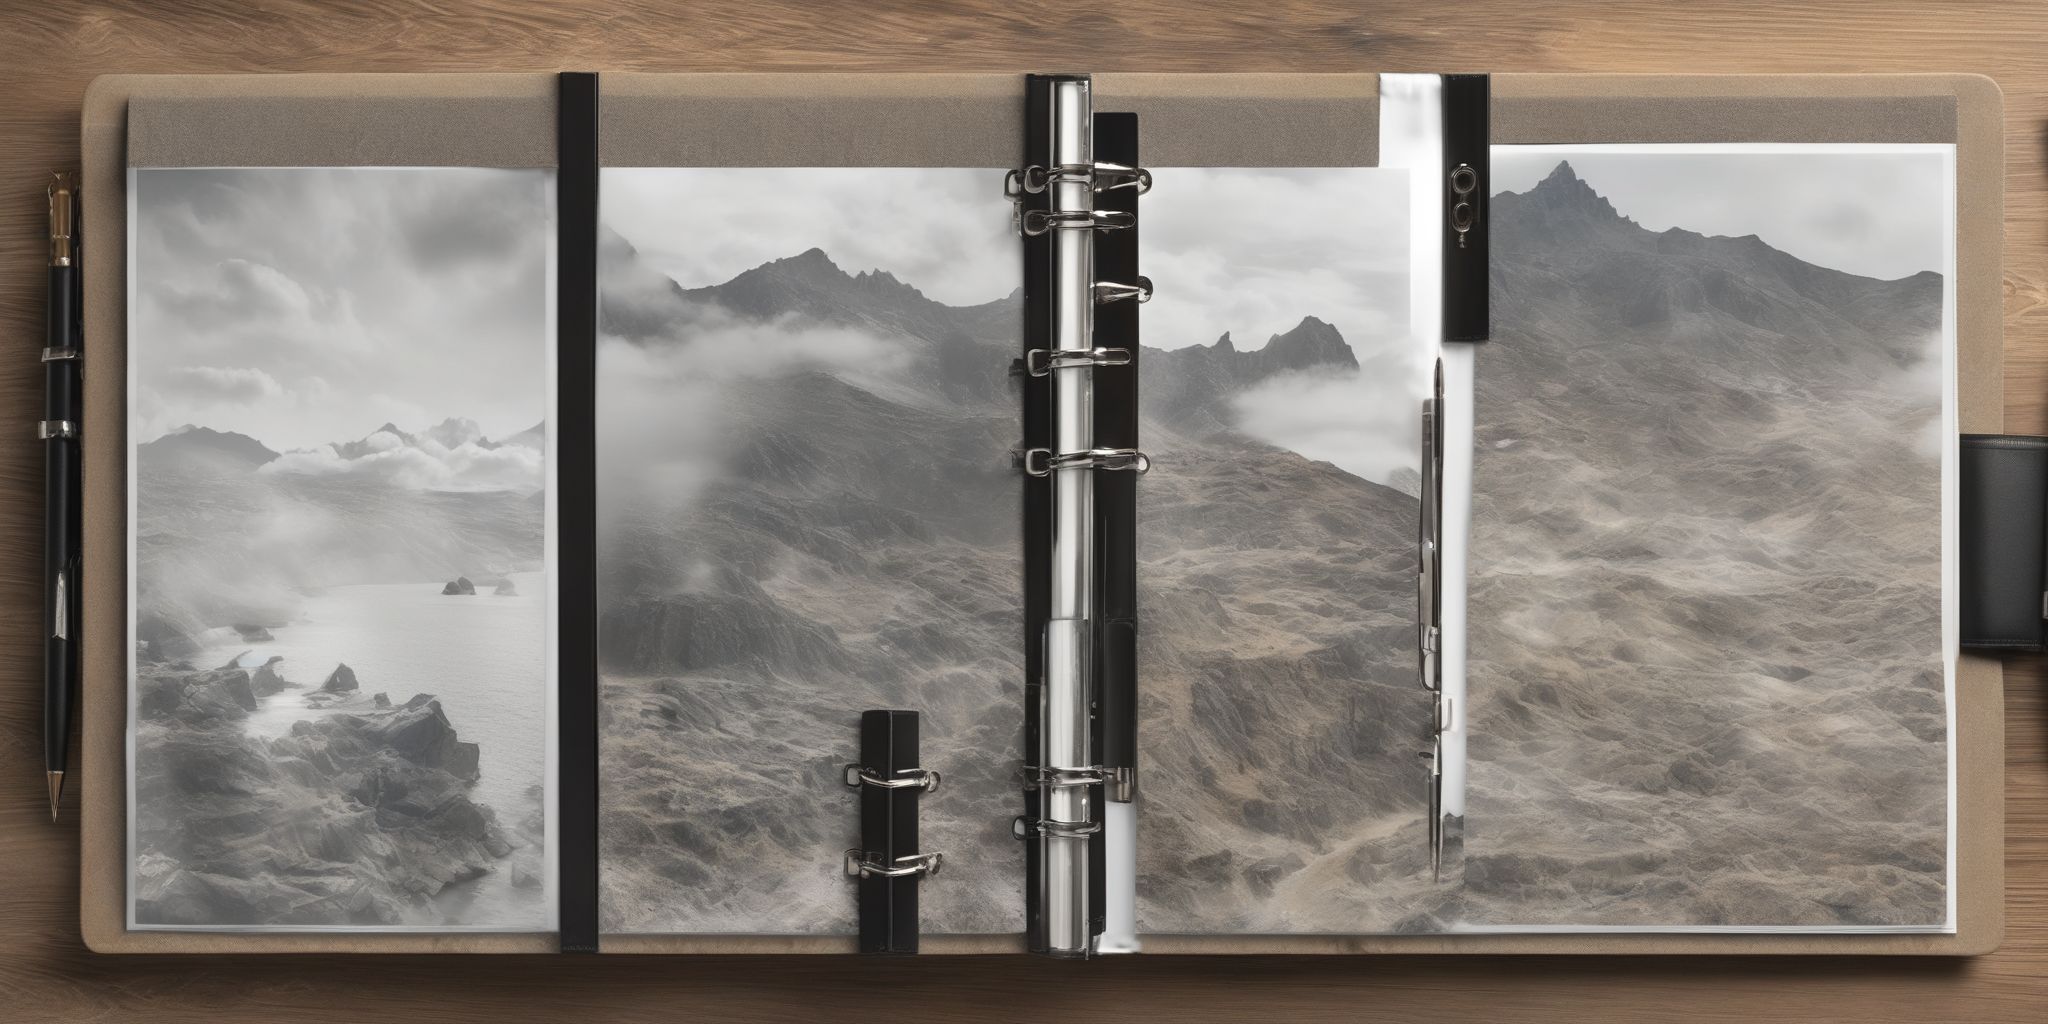 Binder  in realistic, photographic style